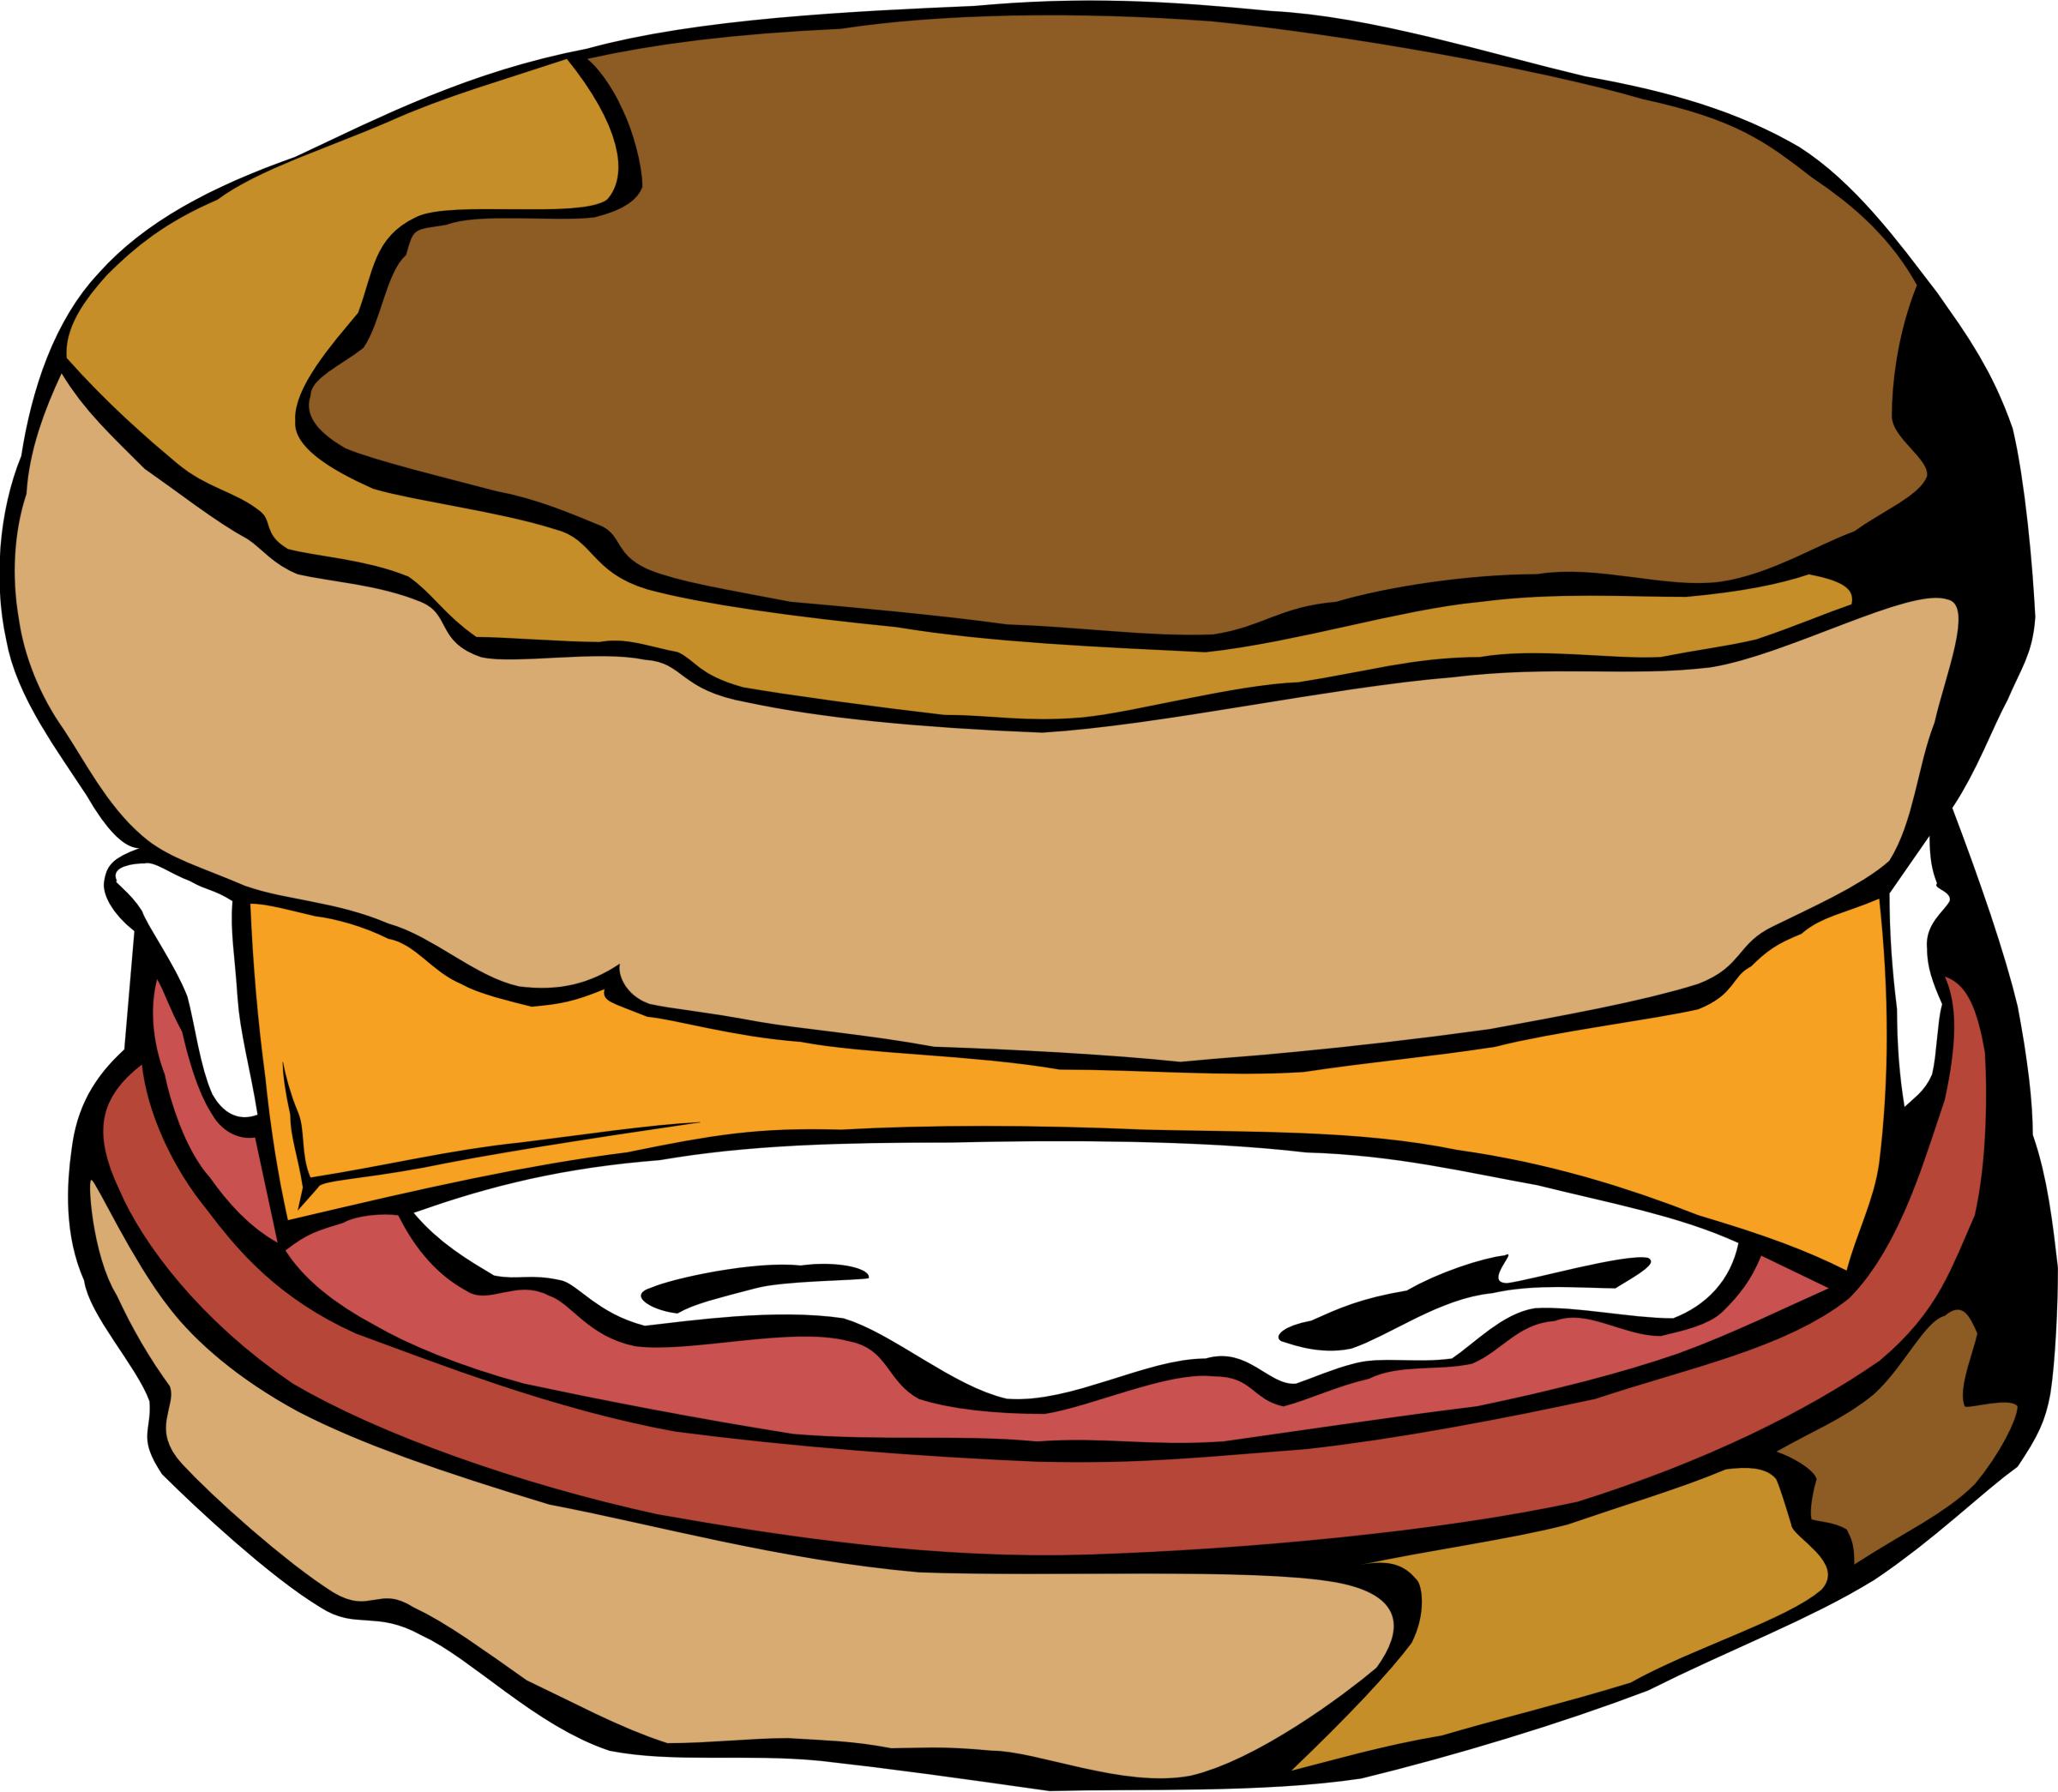 Fast Food, Breakfast, Egg Muffin png